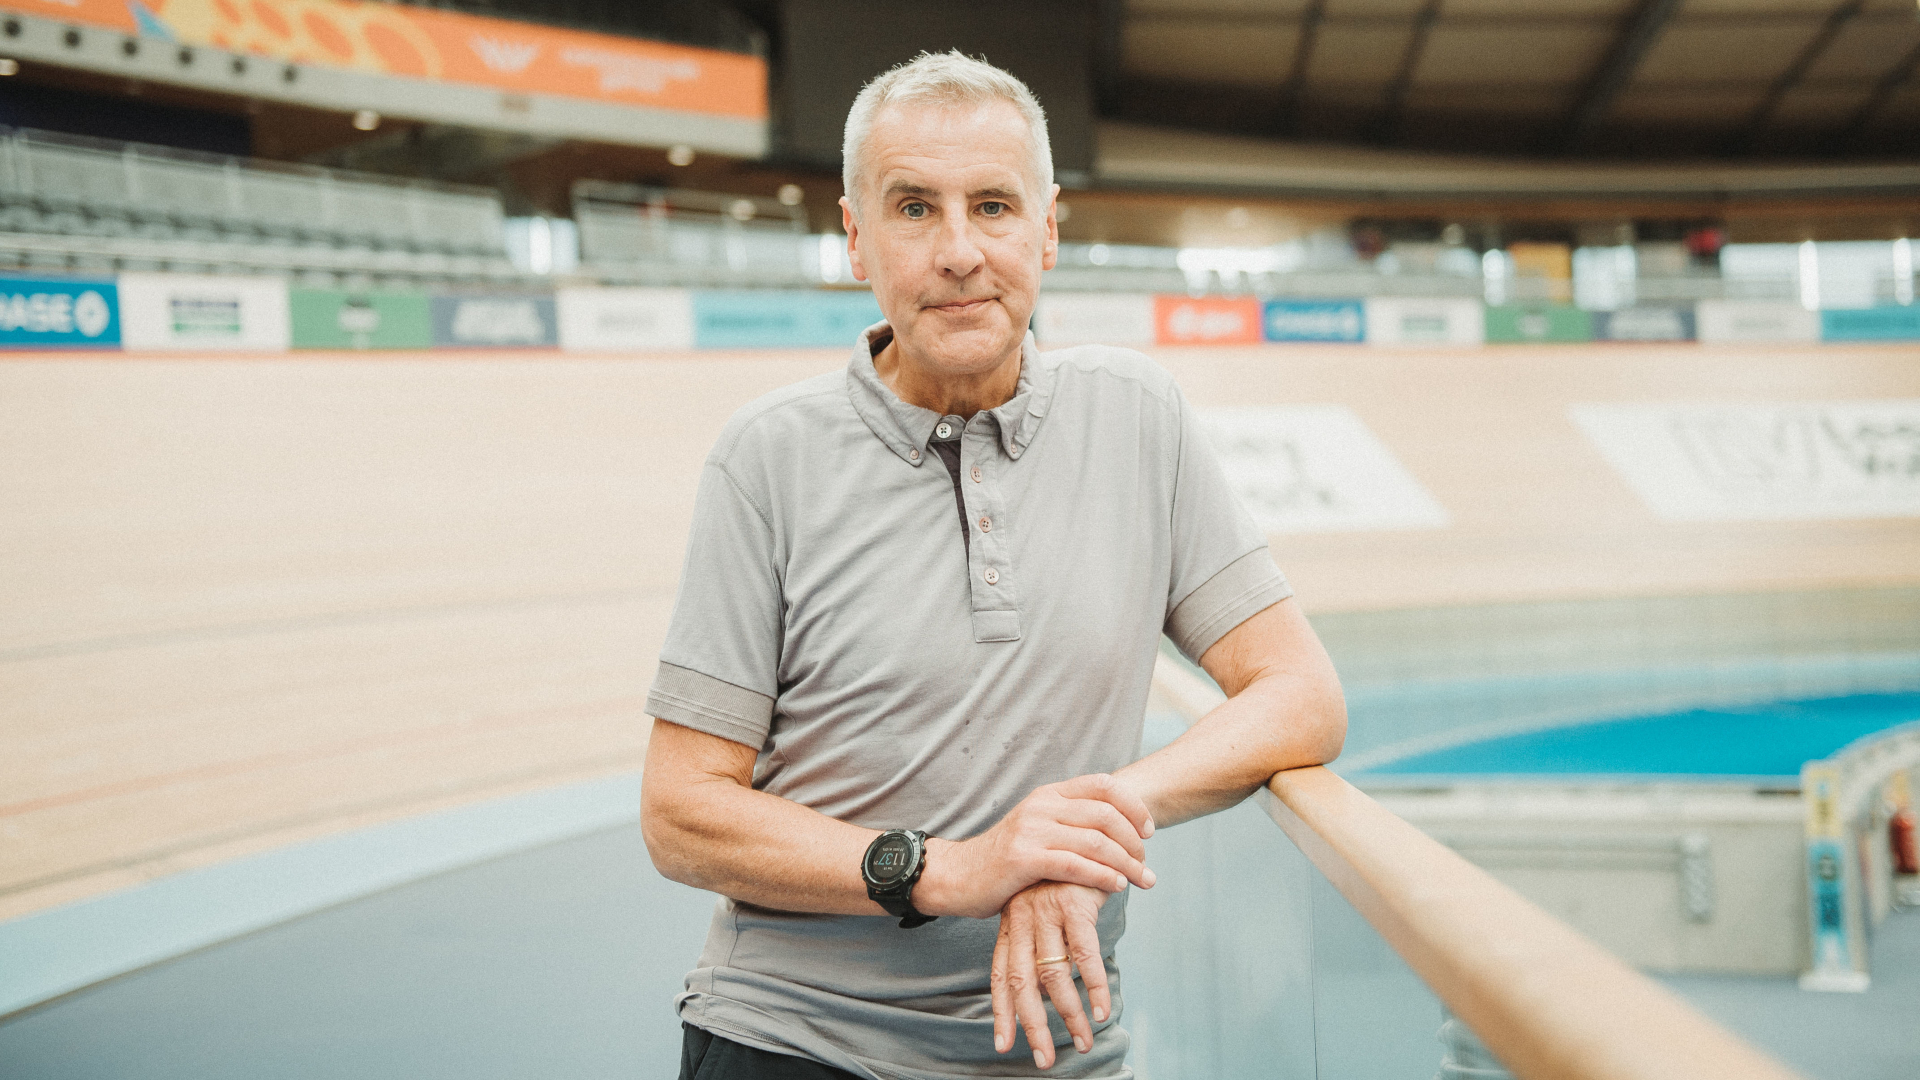 TV tonight Dermot Murnaghan for Sport Relief All-Star Games on BBC One